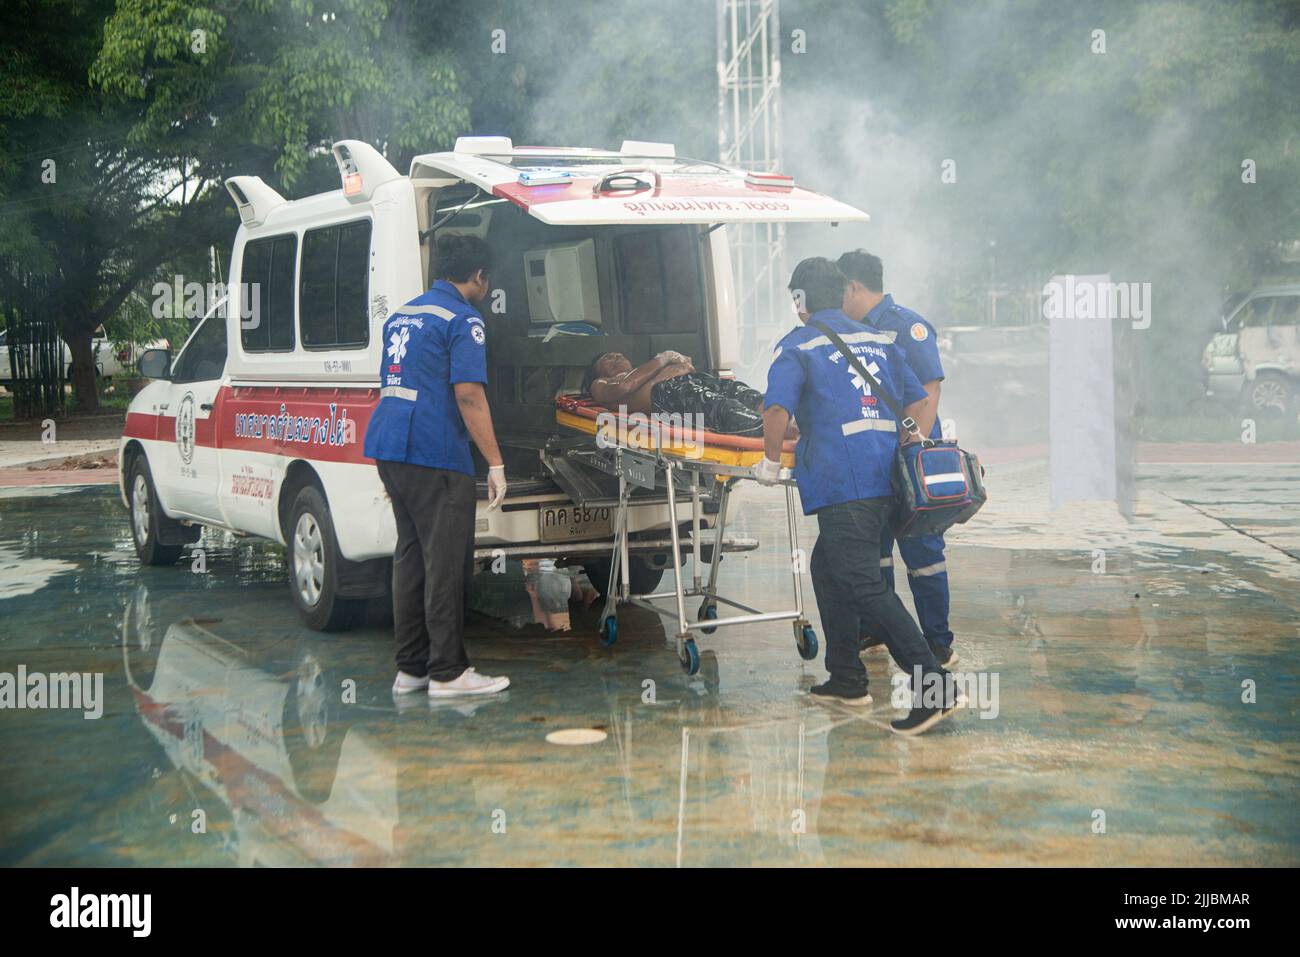 Unknown rescuers and fire brigade Conduct fire-rescue drills by pulling wagons with the injured. Put on a ventilator and take him to an ambulance. Stock Photo